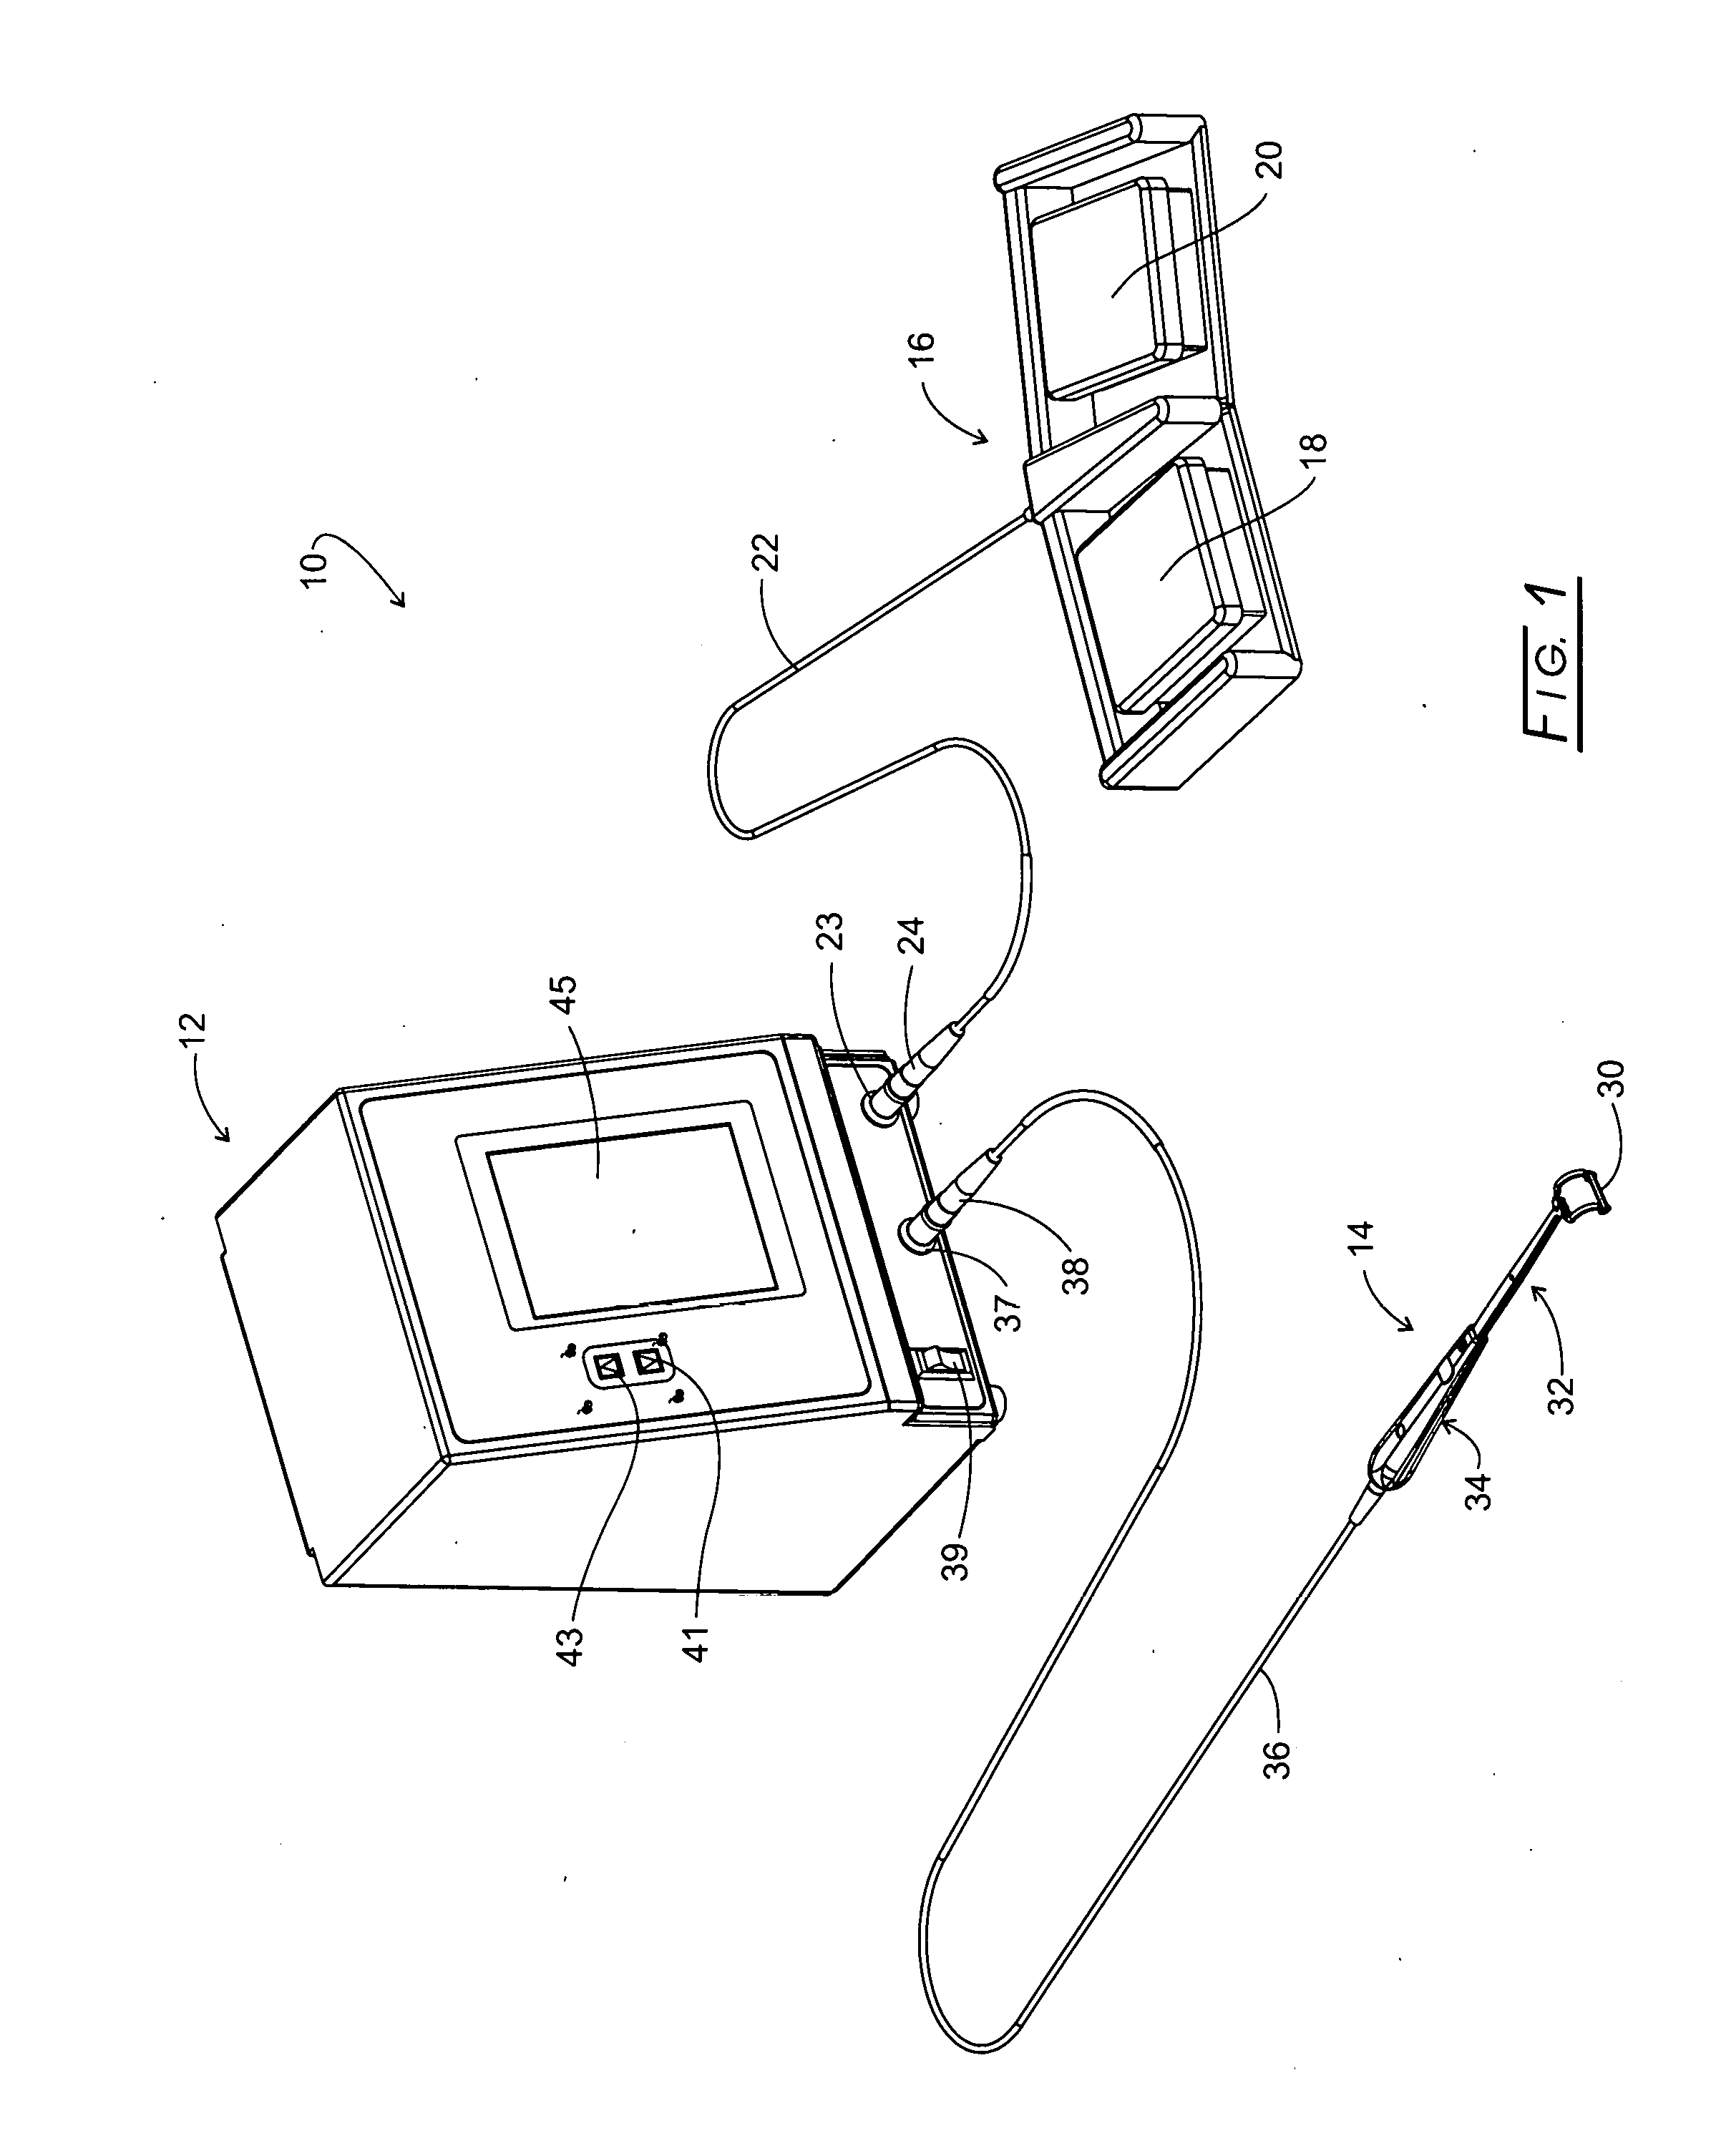 Apparatus, System and Method for Excision of Soft Tissue